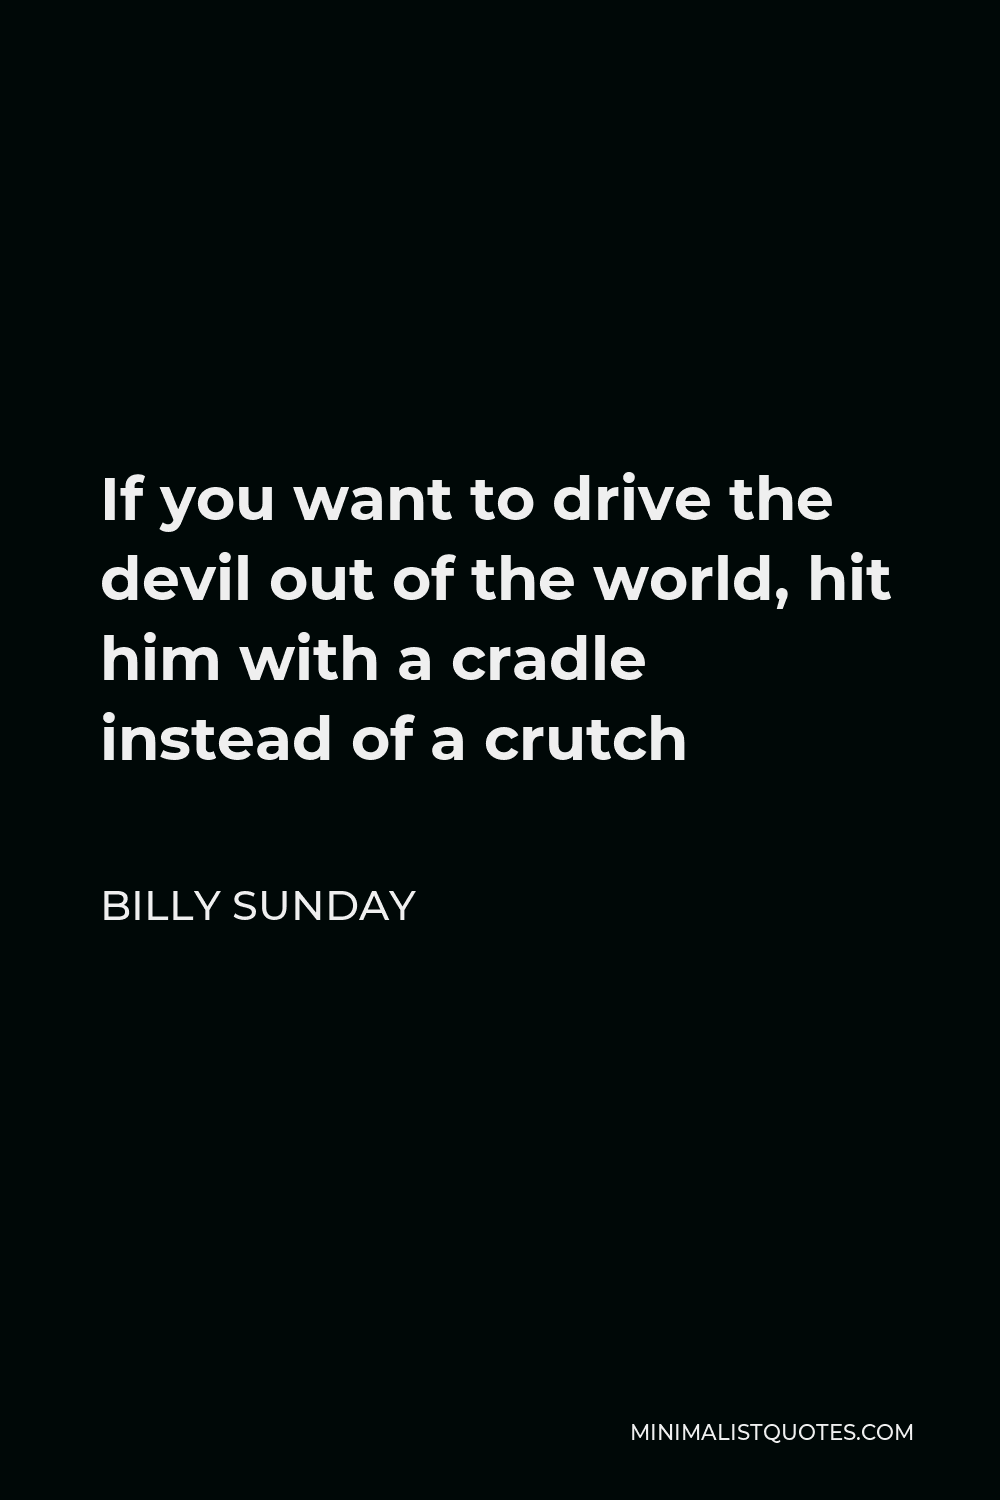 Billy Sunday Quote - If you want to drive the devil out of the world, hit him with a cradle instead of a crutch